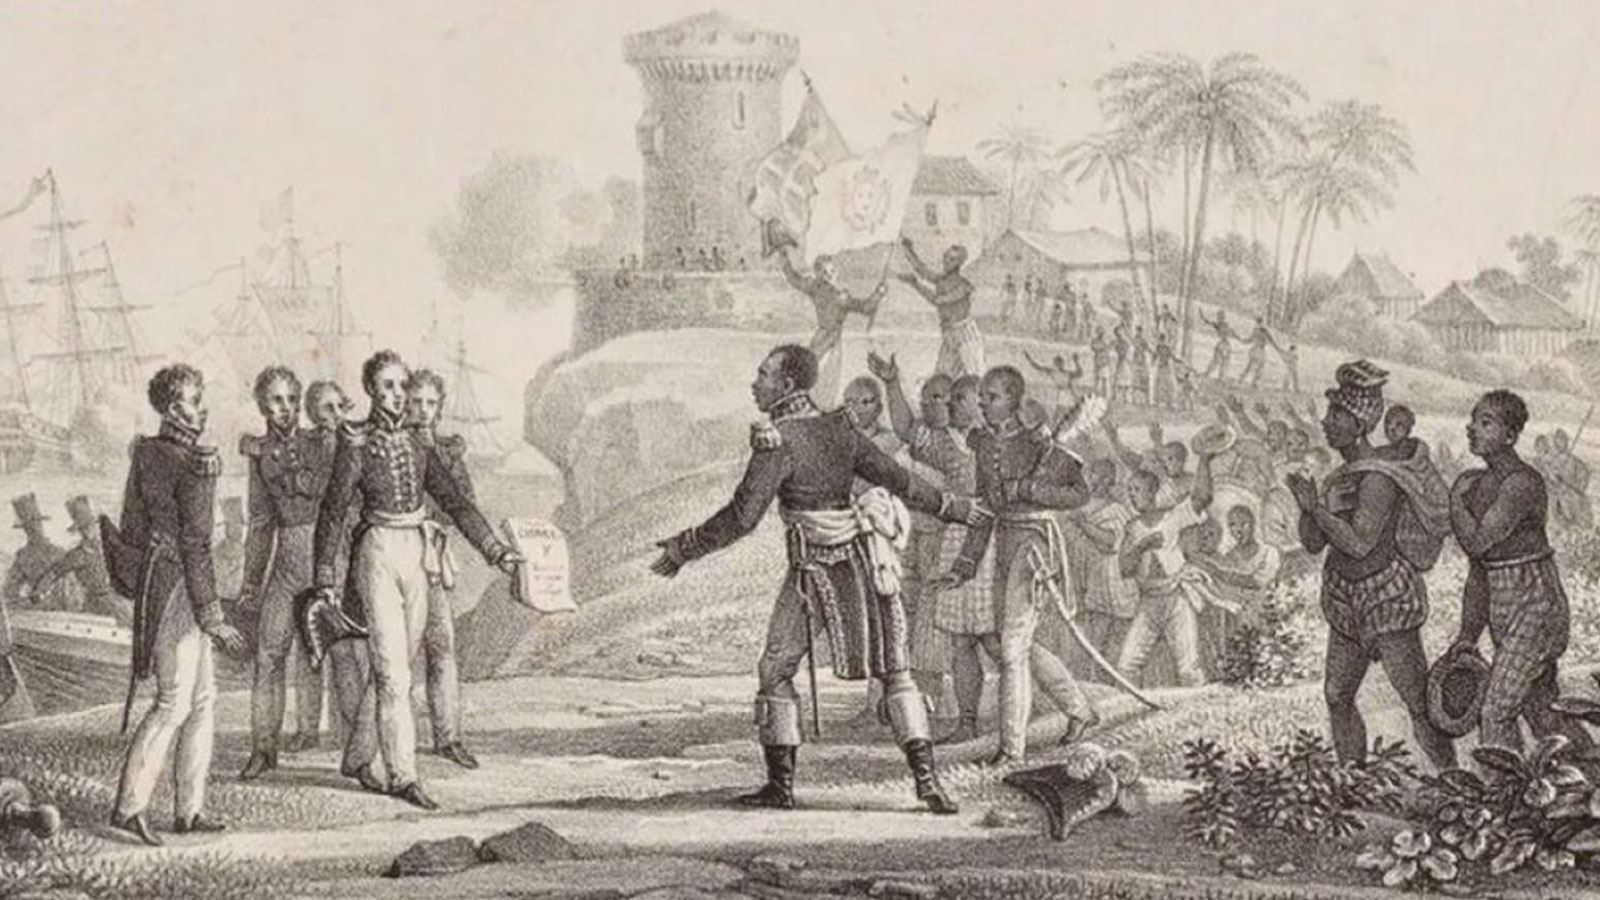 When France extorted Haiti – the greatest heist in history